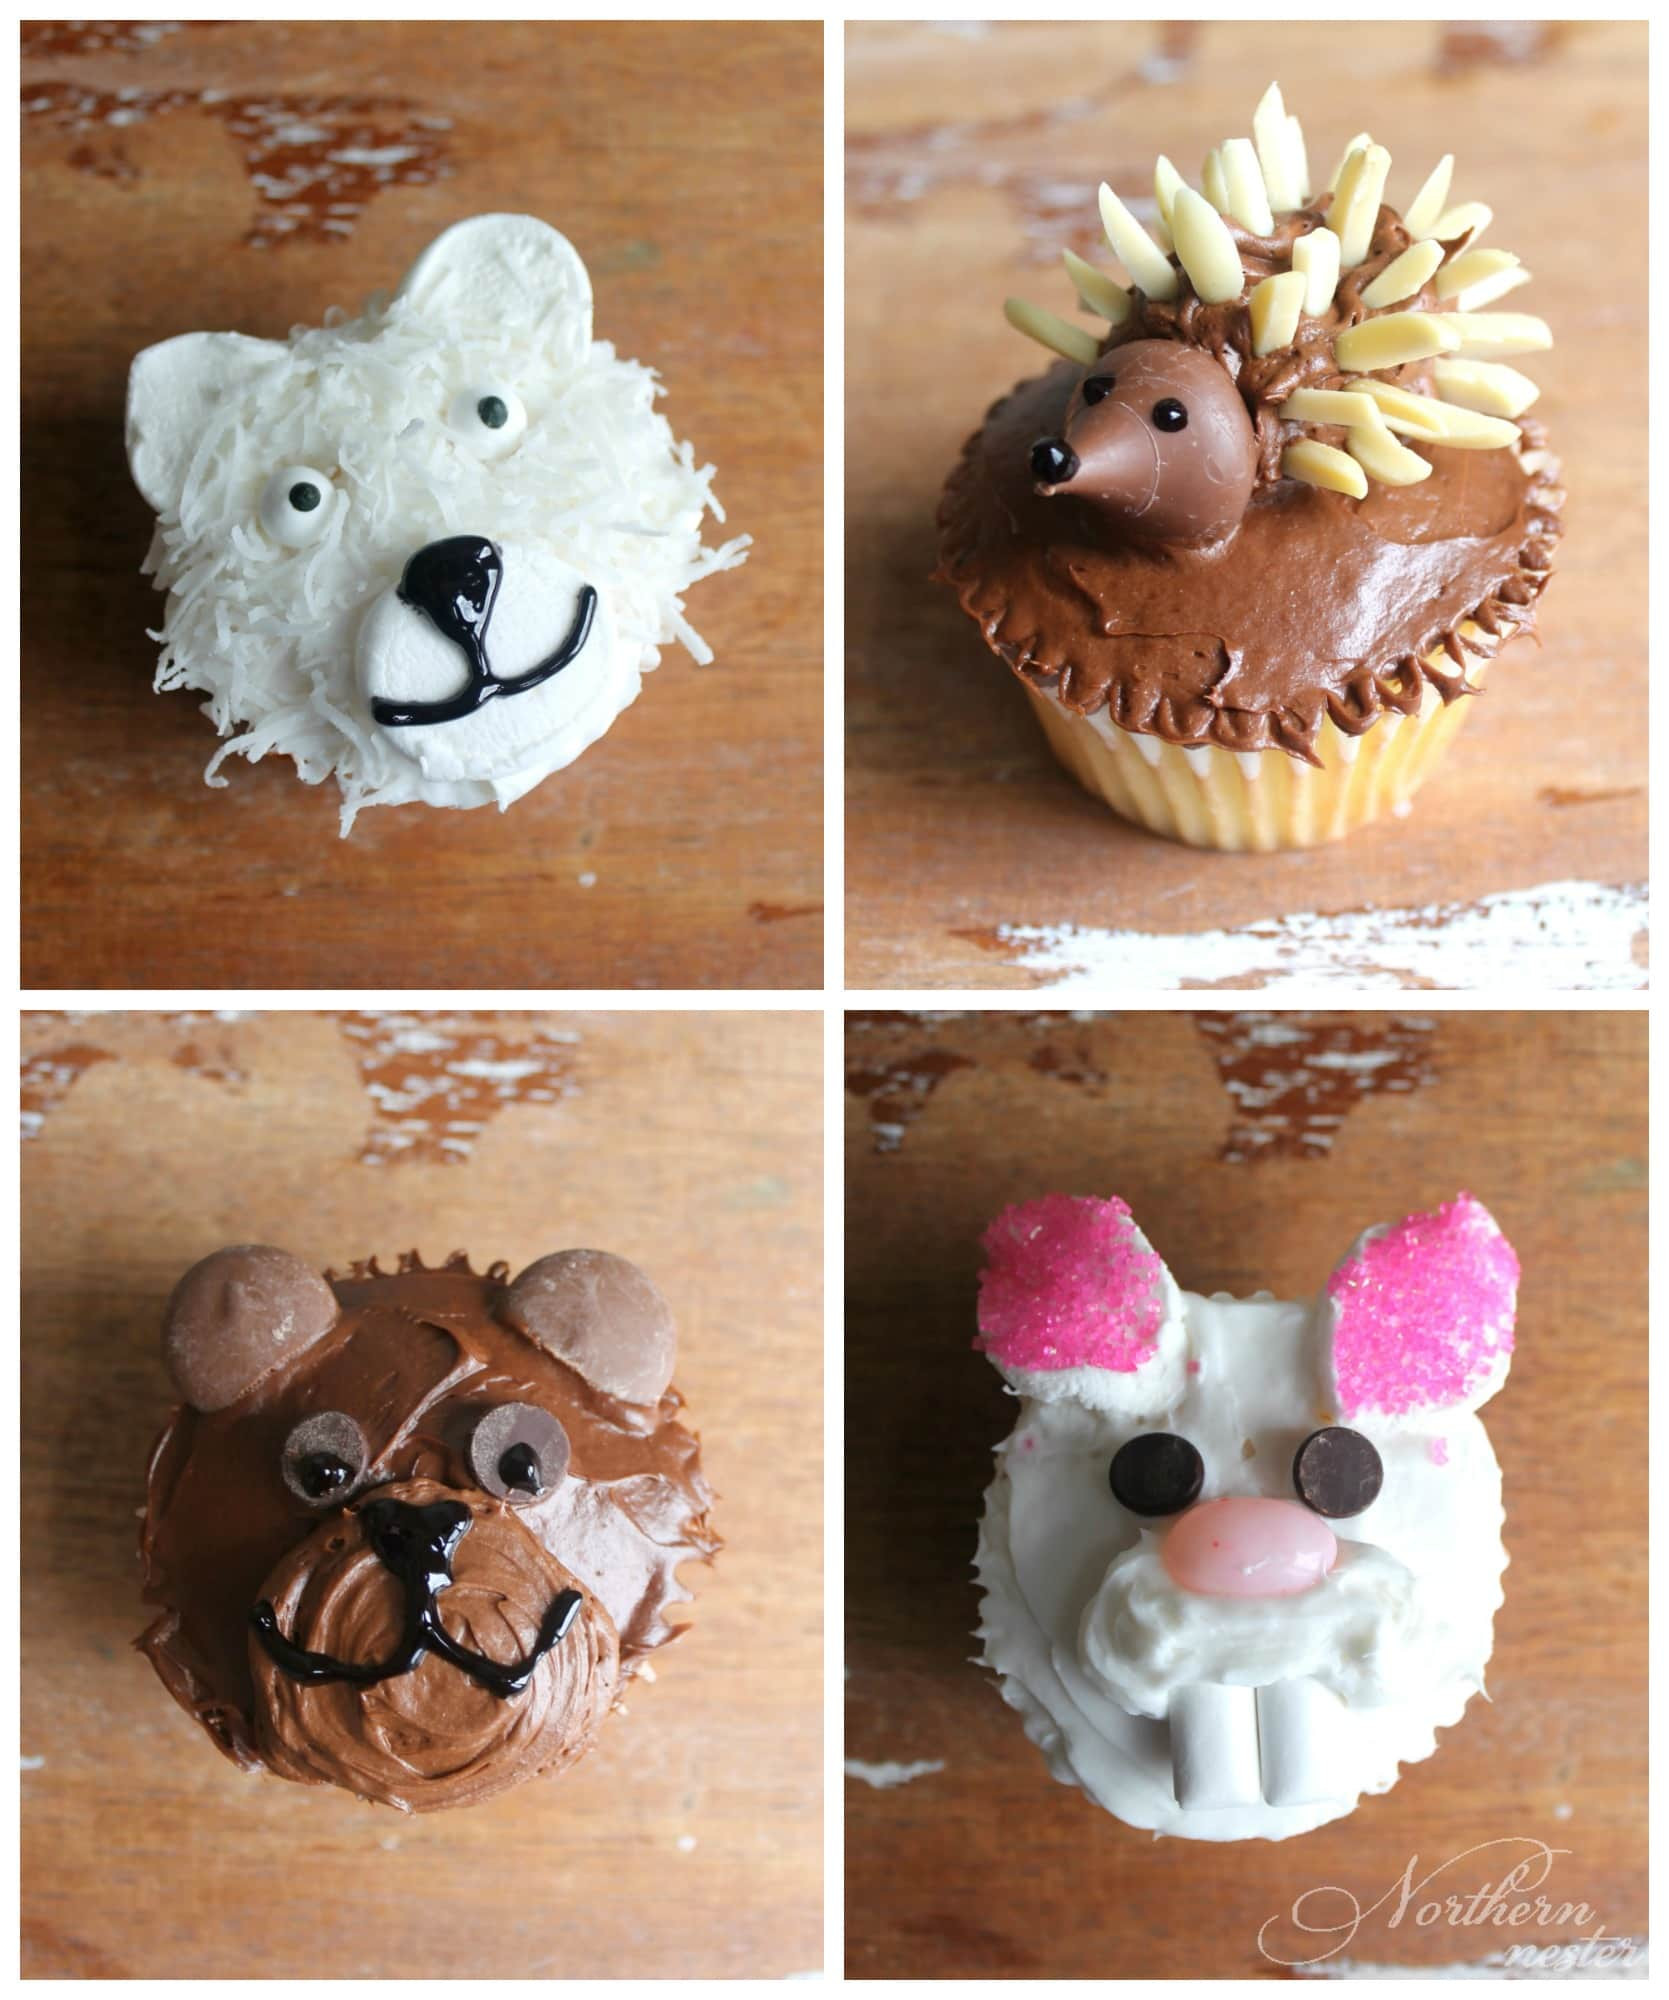 Cupcake Decorating Ideas For Kids
 Easy Cupcake Decorating Ideas For Kids Northern Nester